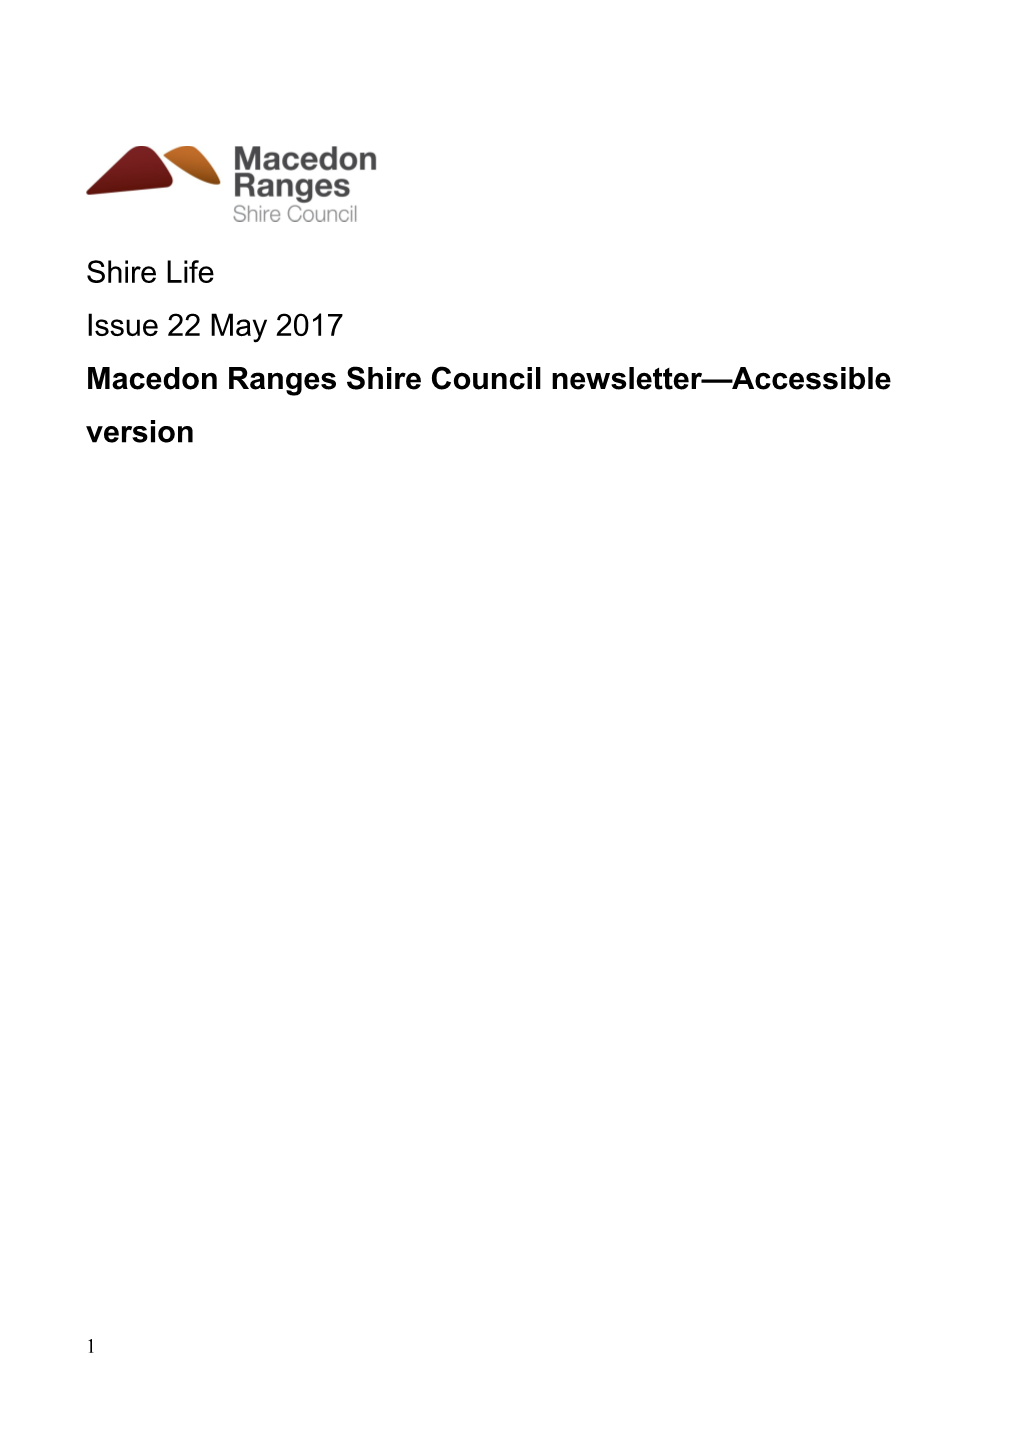 Macedon Ranges Shire Council Newsletter Accessible Version